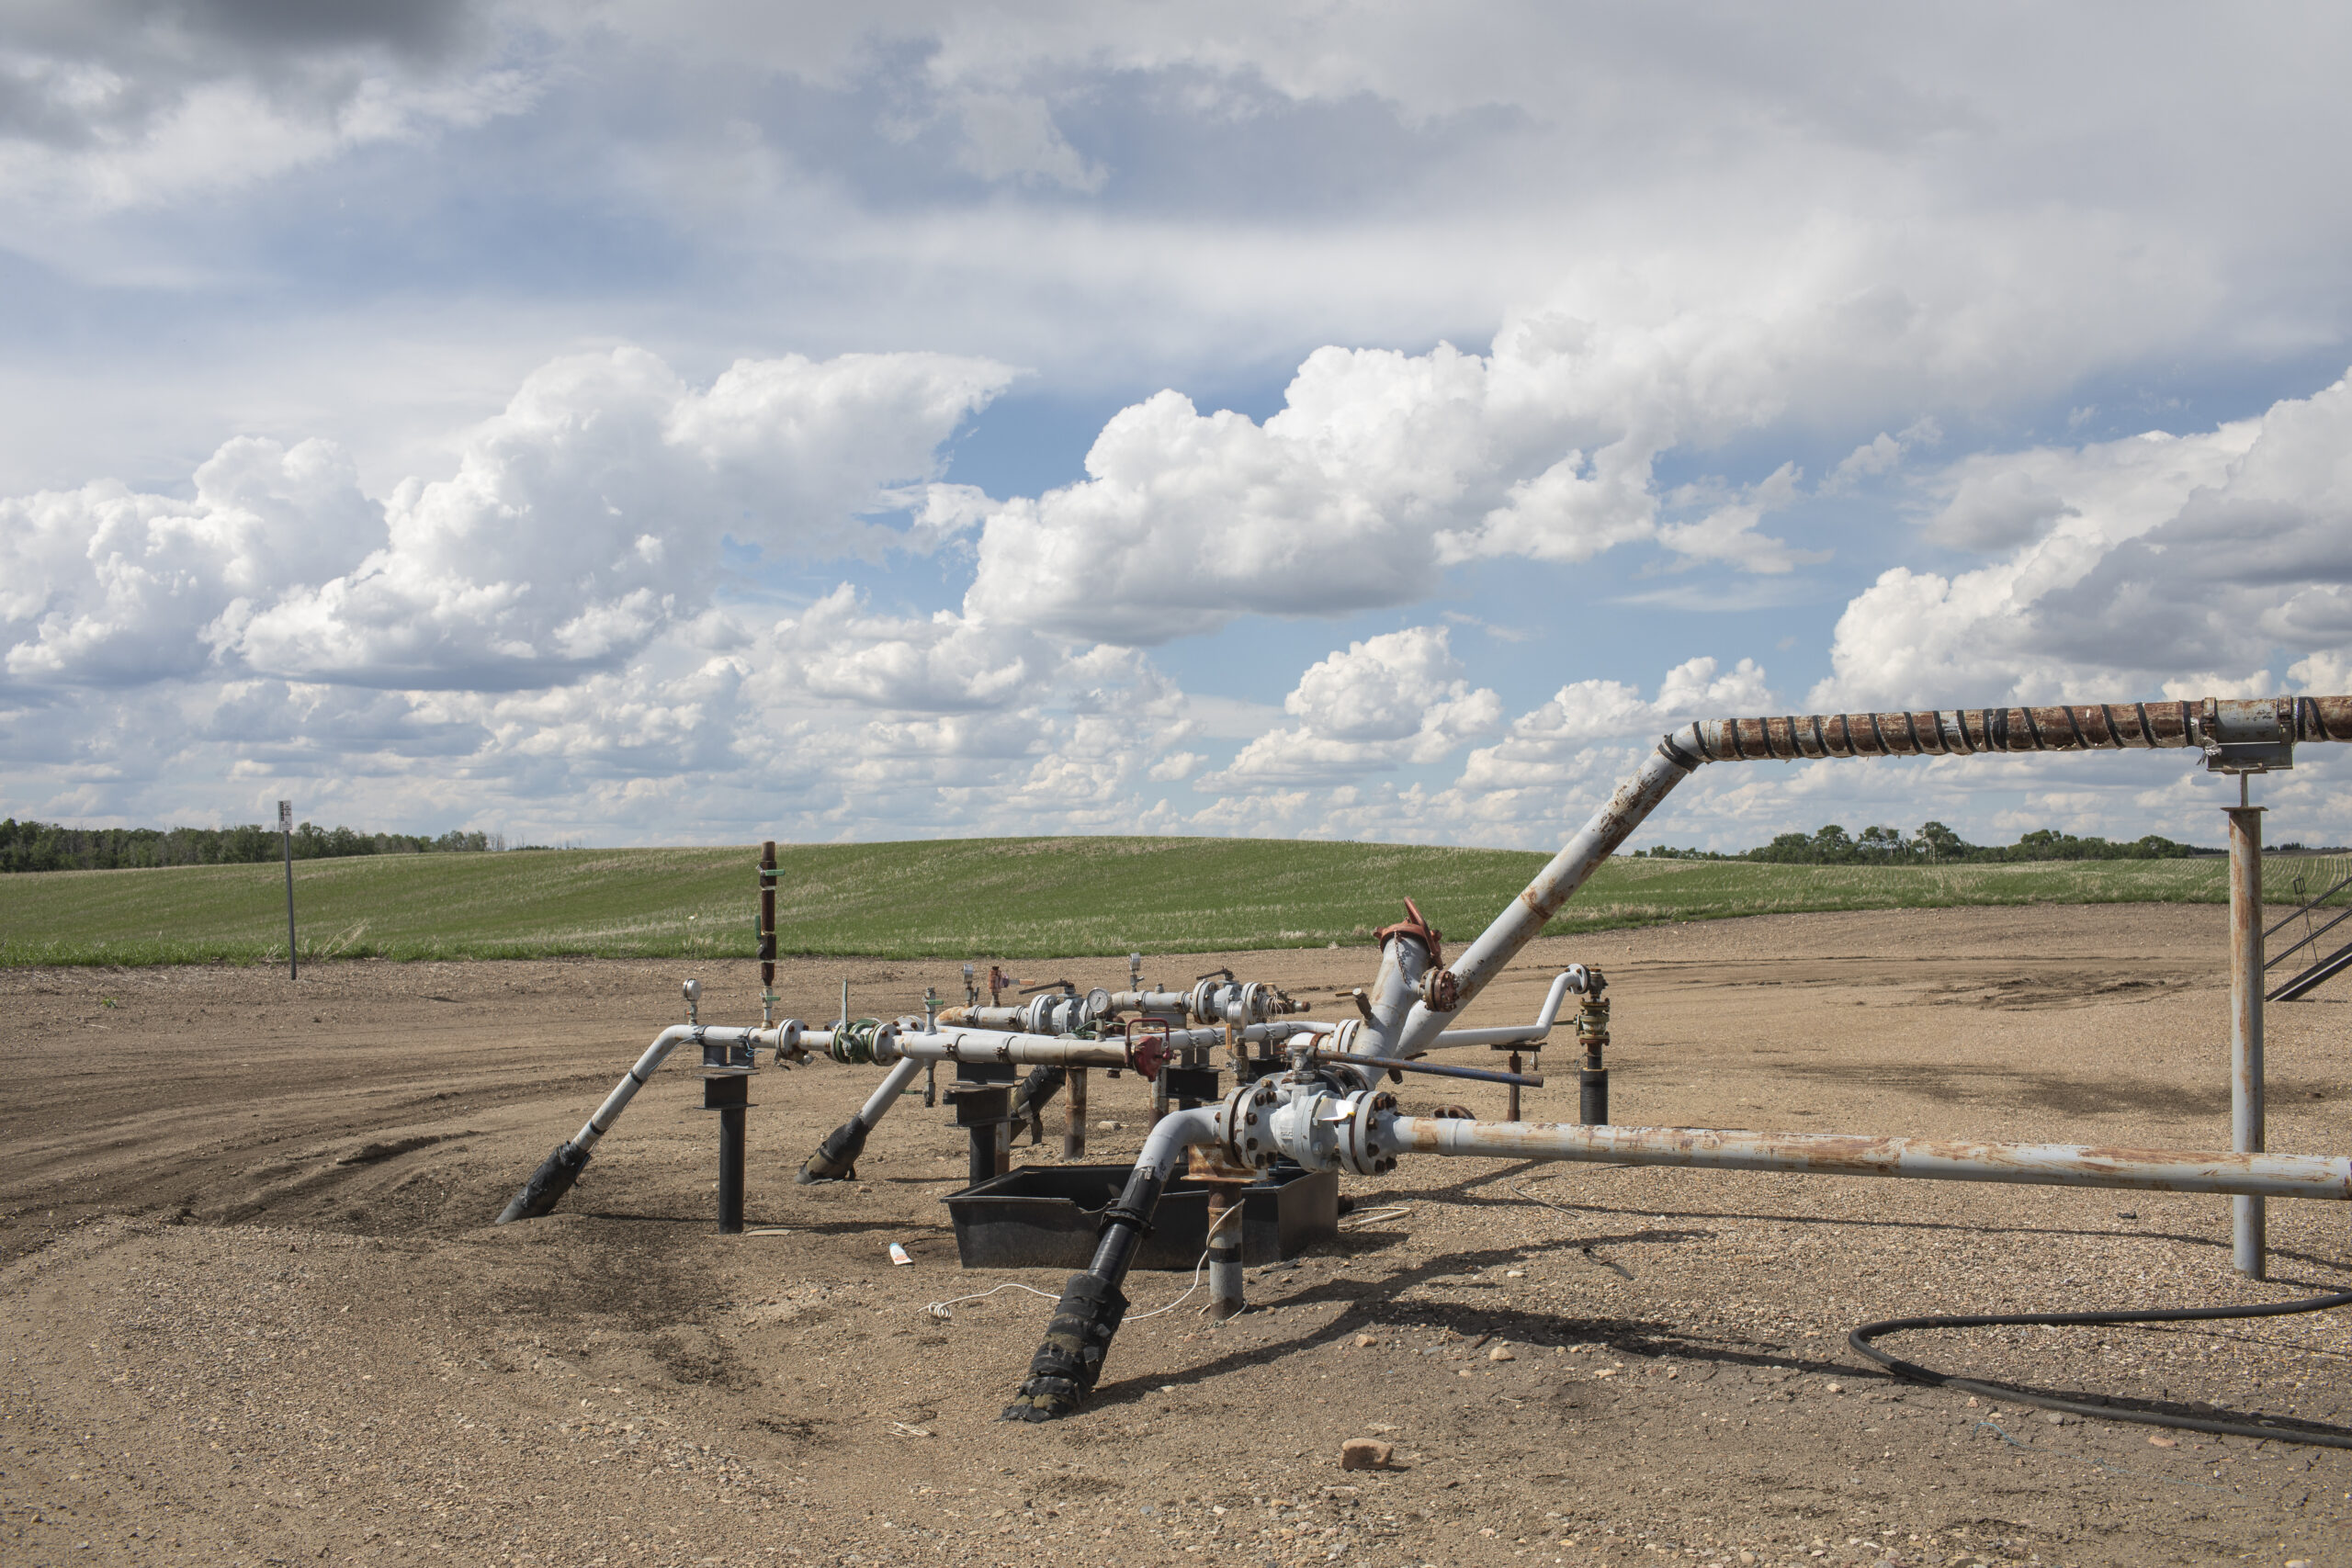 Inspectors trained by the regulator carried out 266 methane inspections in Alberta in 2020 and found 32 'unsatisfactory outcomes.' Photo: Amber Bracken / The Narwhal